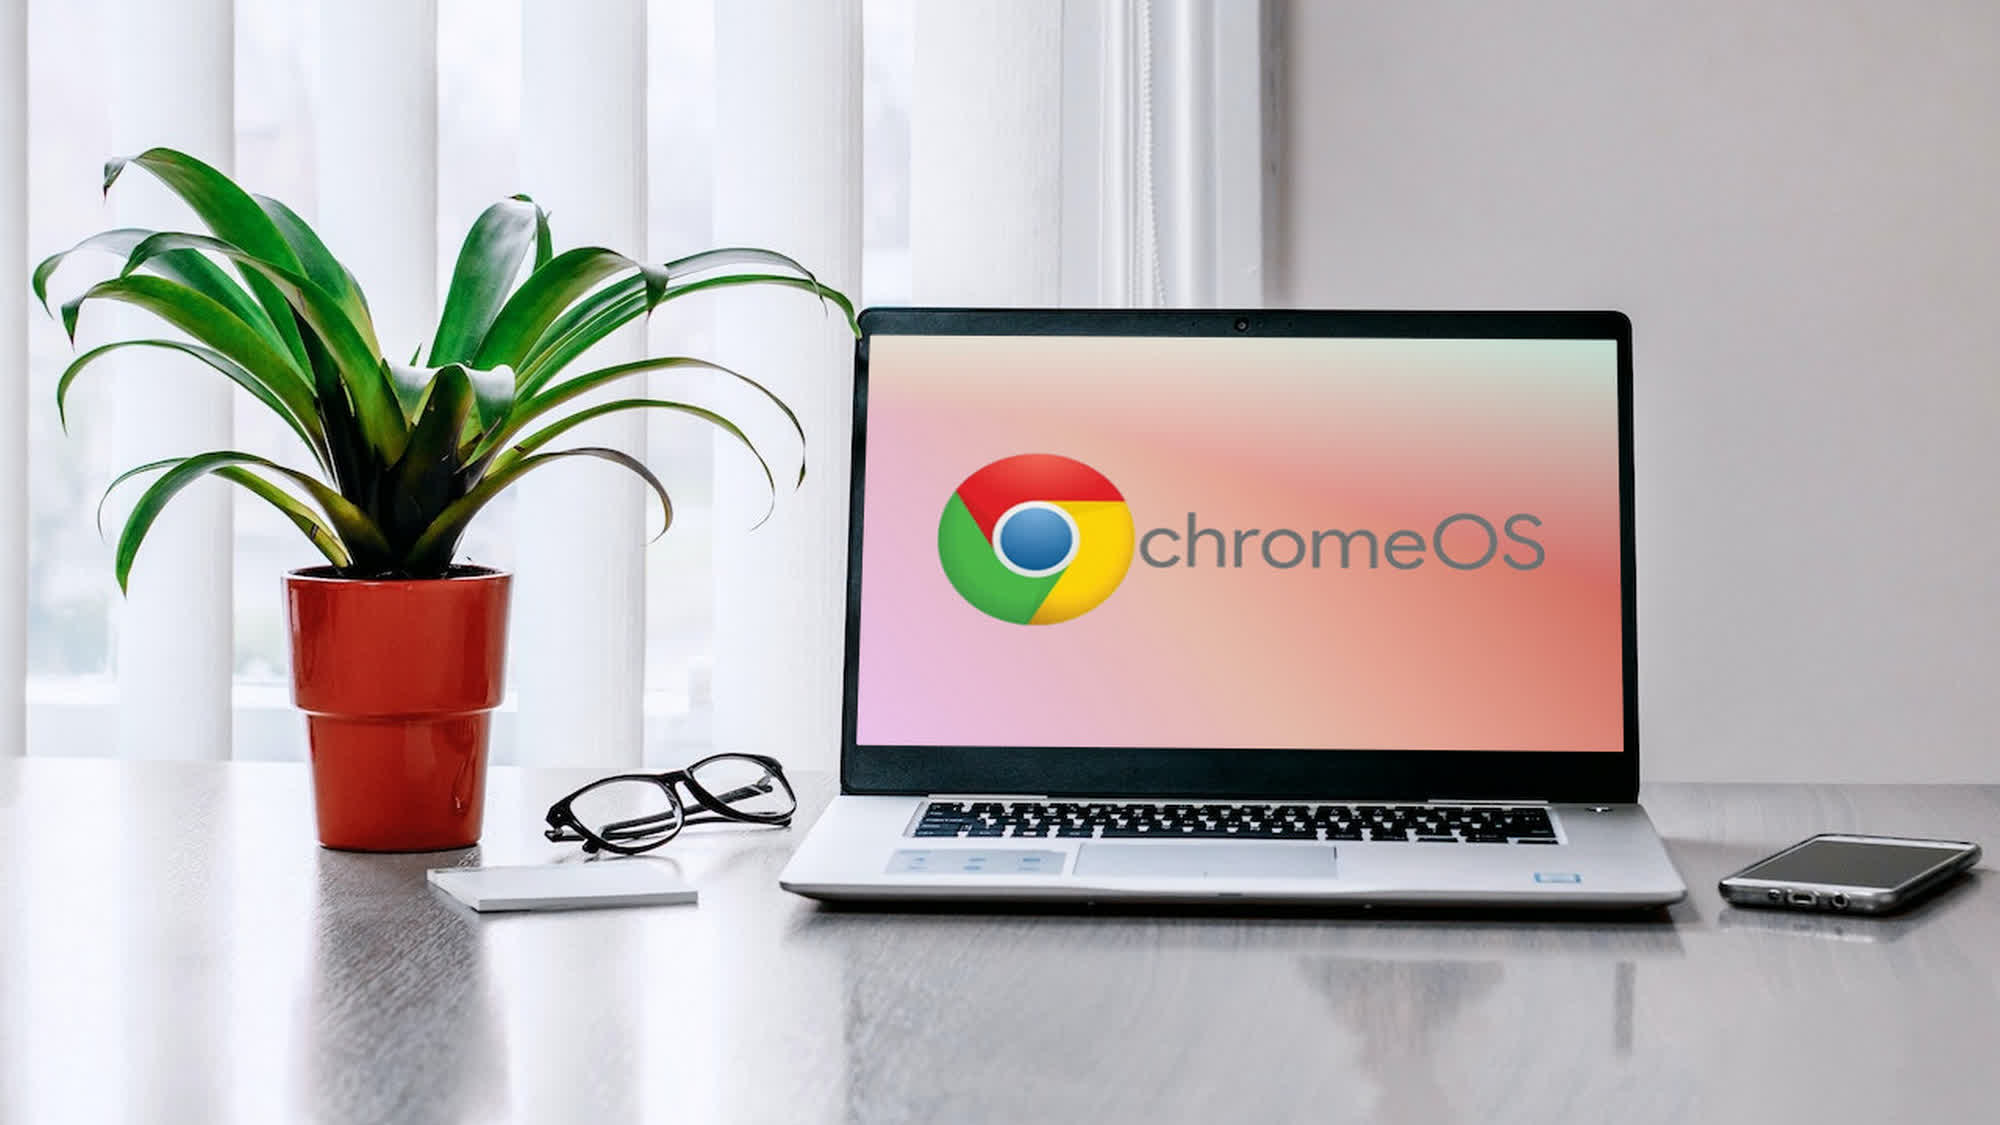 Google is removing the Chrome browser from ChromeOS